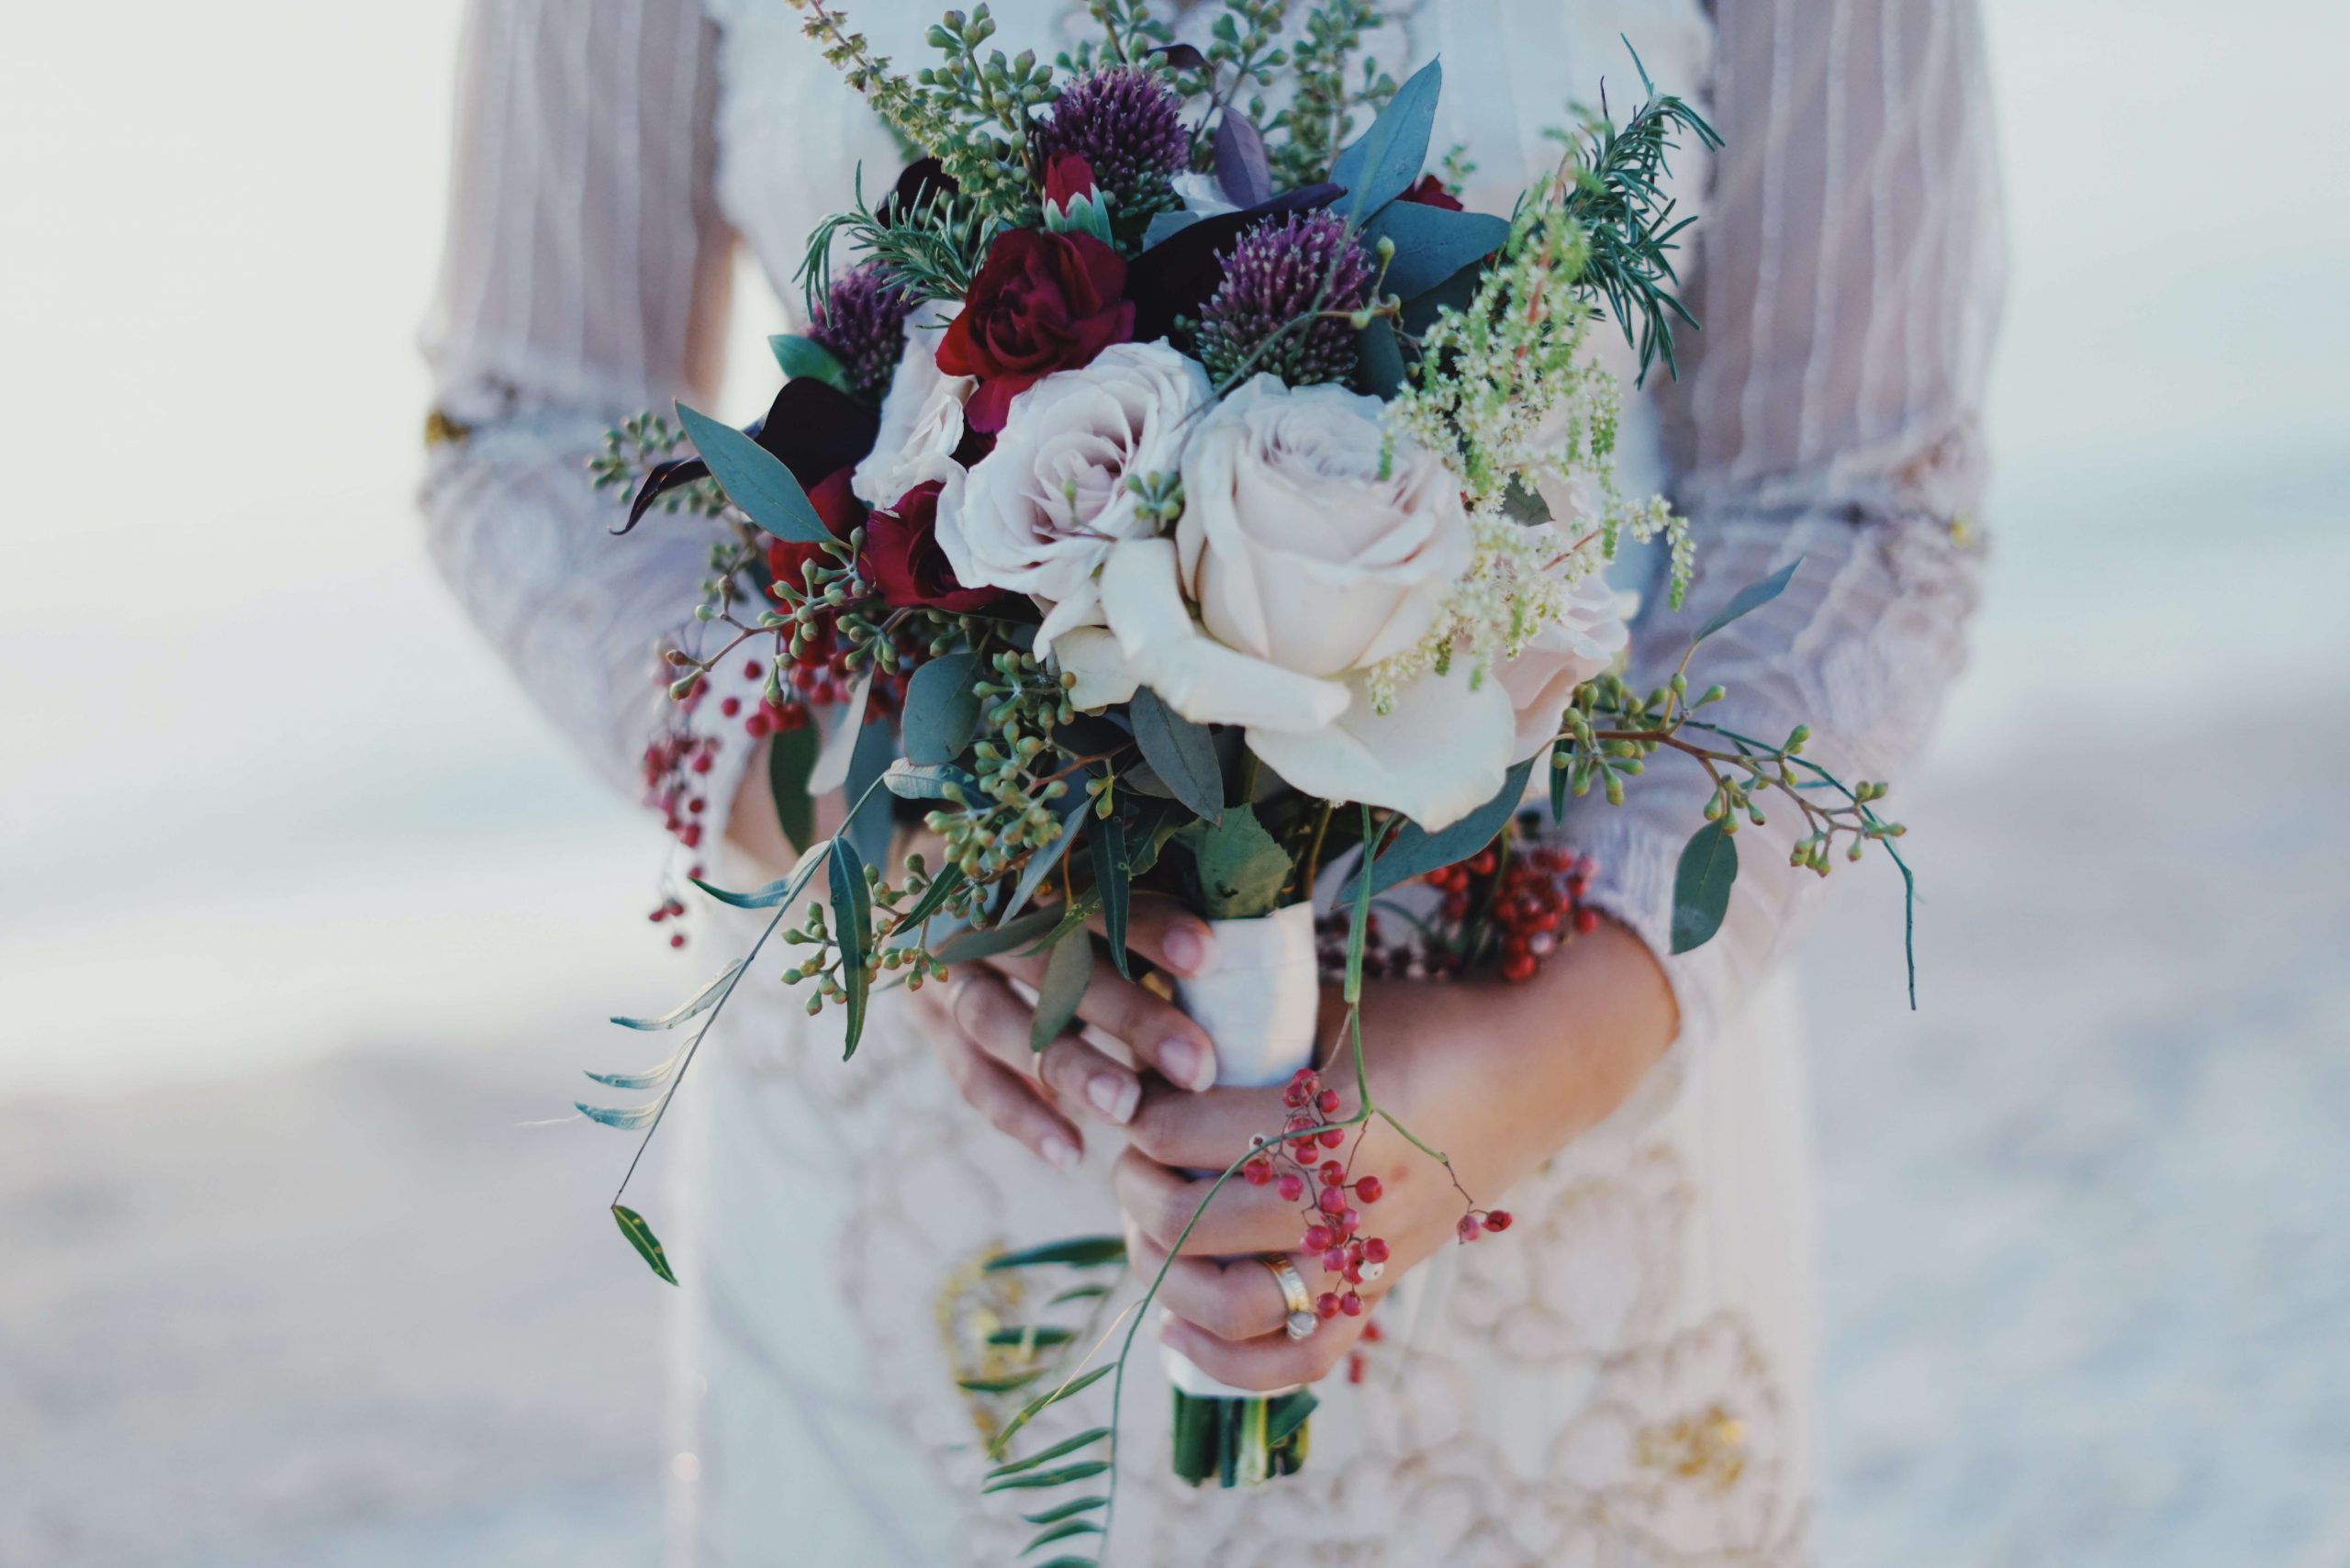 How To Choose Flowers For A Wedding Bouquet